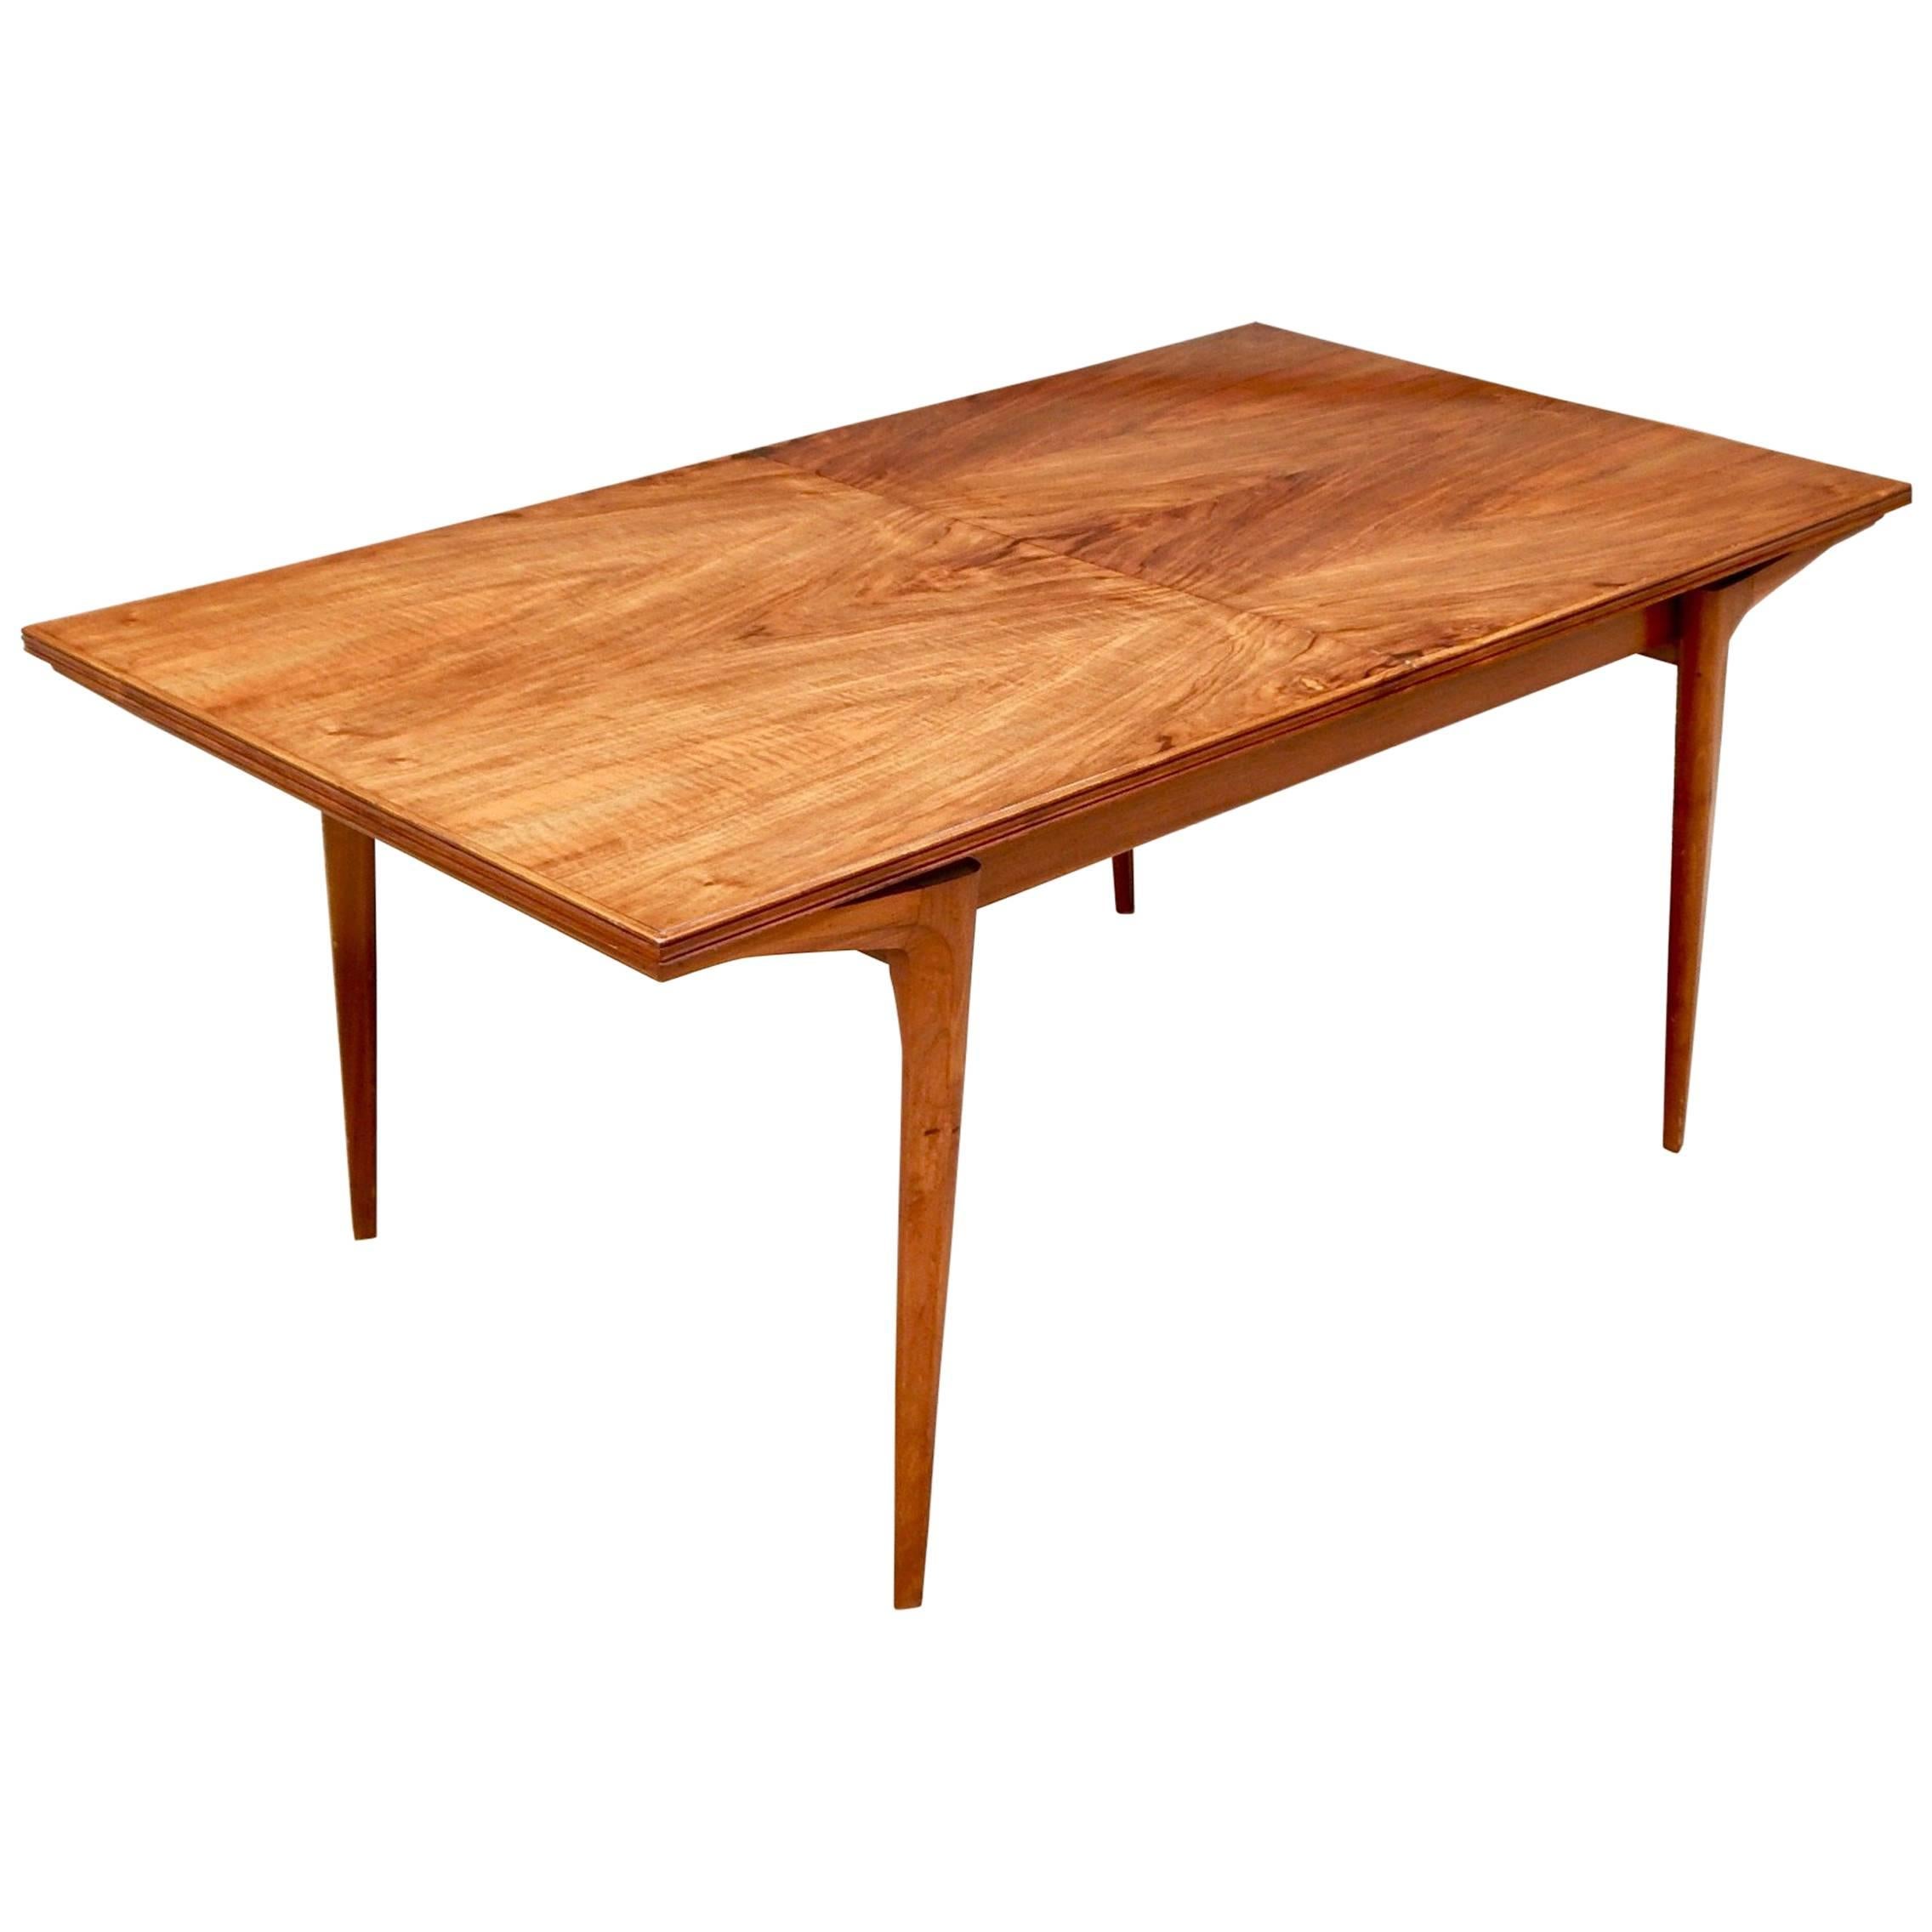 Argentine Mid-Century Modern Extendable Dining Table in Highly Figured Walnut